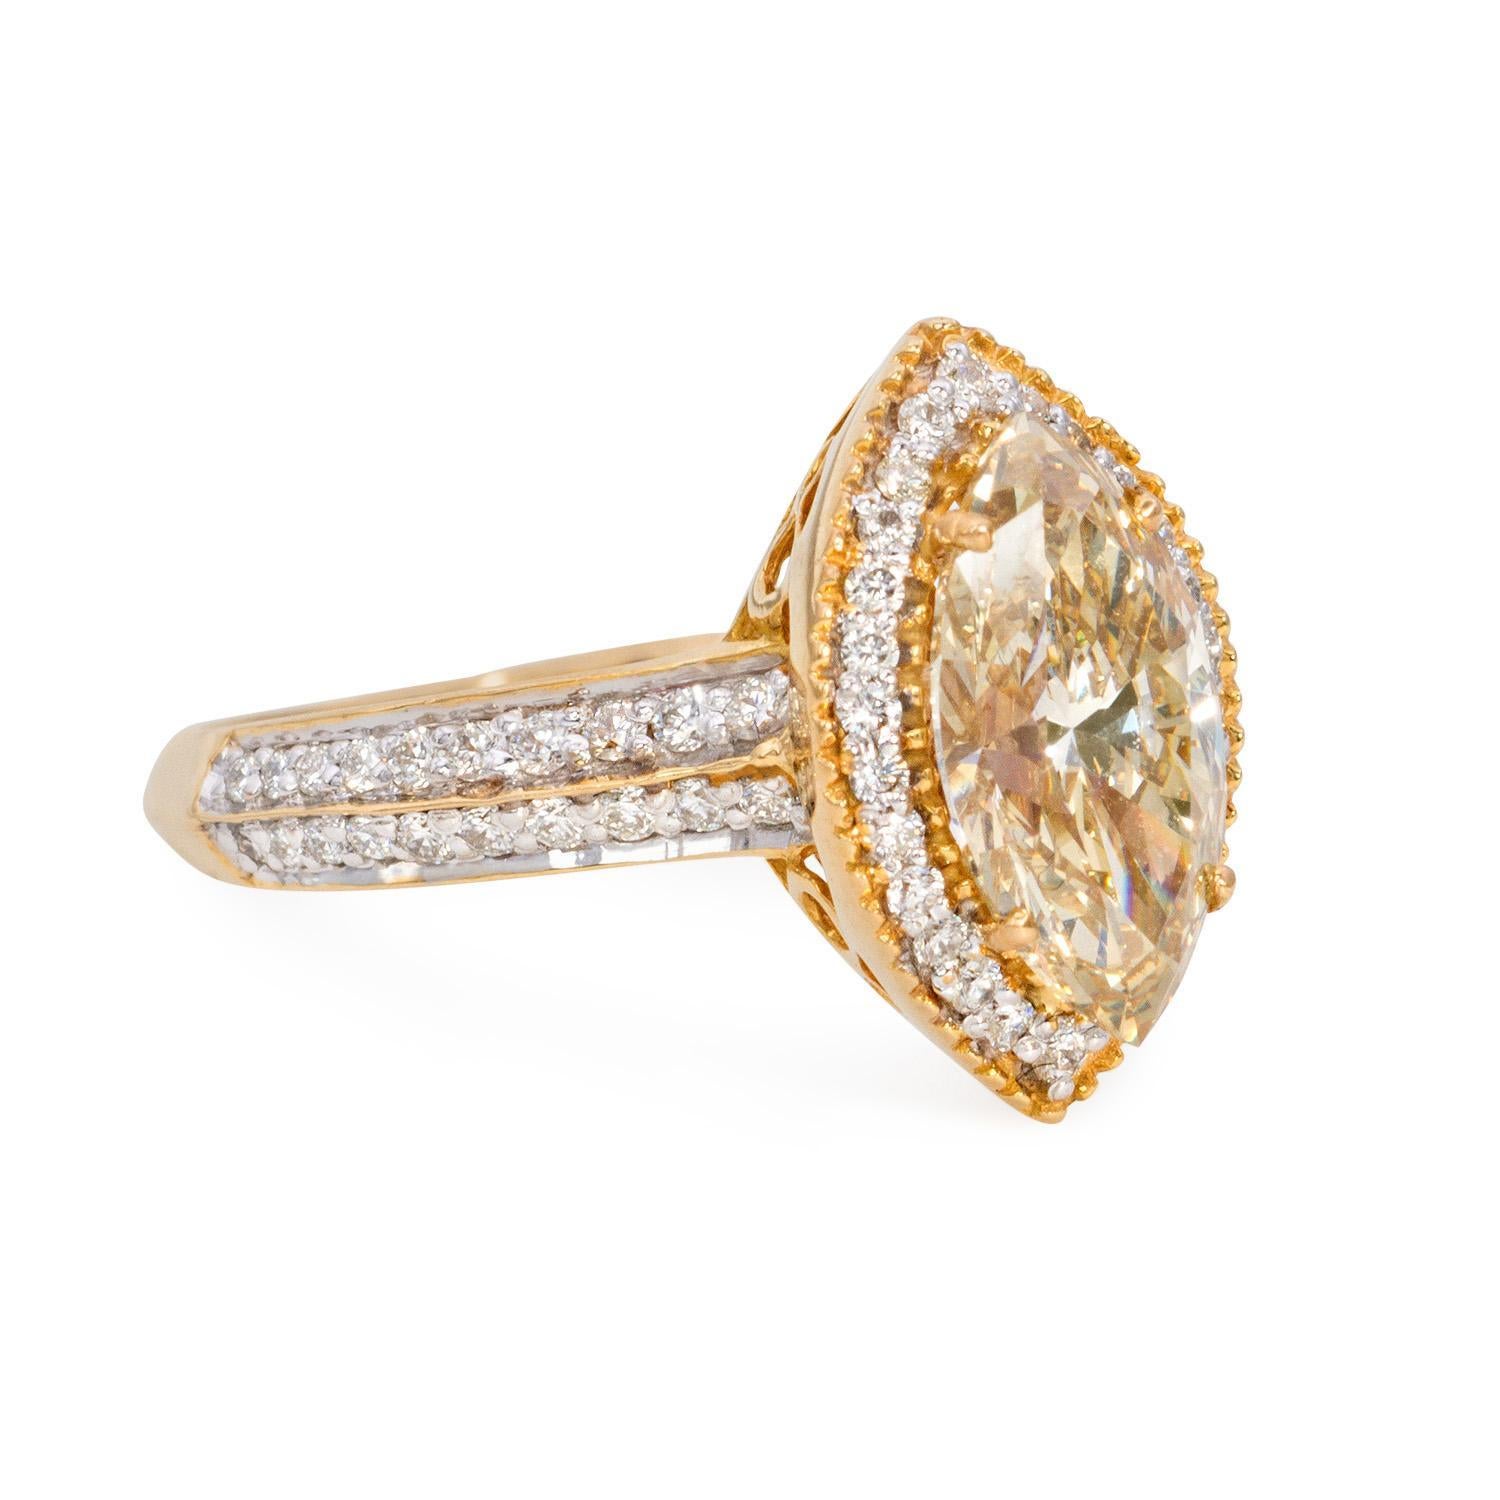 Introducing our exquisite Champagne Ring, a true embodiment of elegance and sophistication. This stunning ring features a captivating Brown Yellow Marquise Diamond weighing 1.51 carats, complemented by 0.23 carats of sparkling round-cut diamonds,